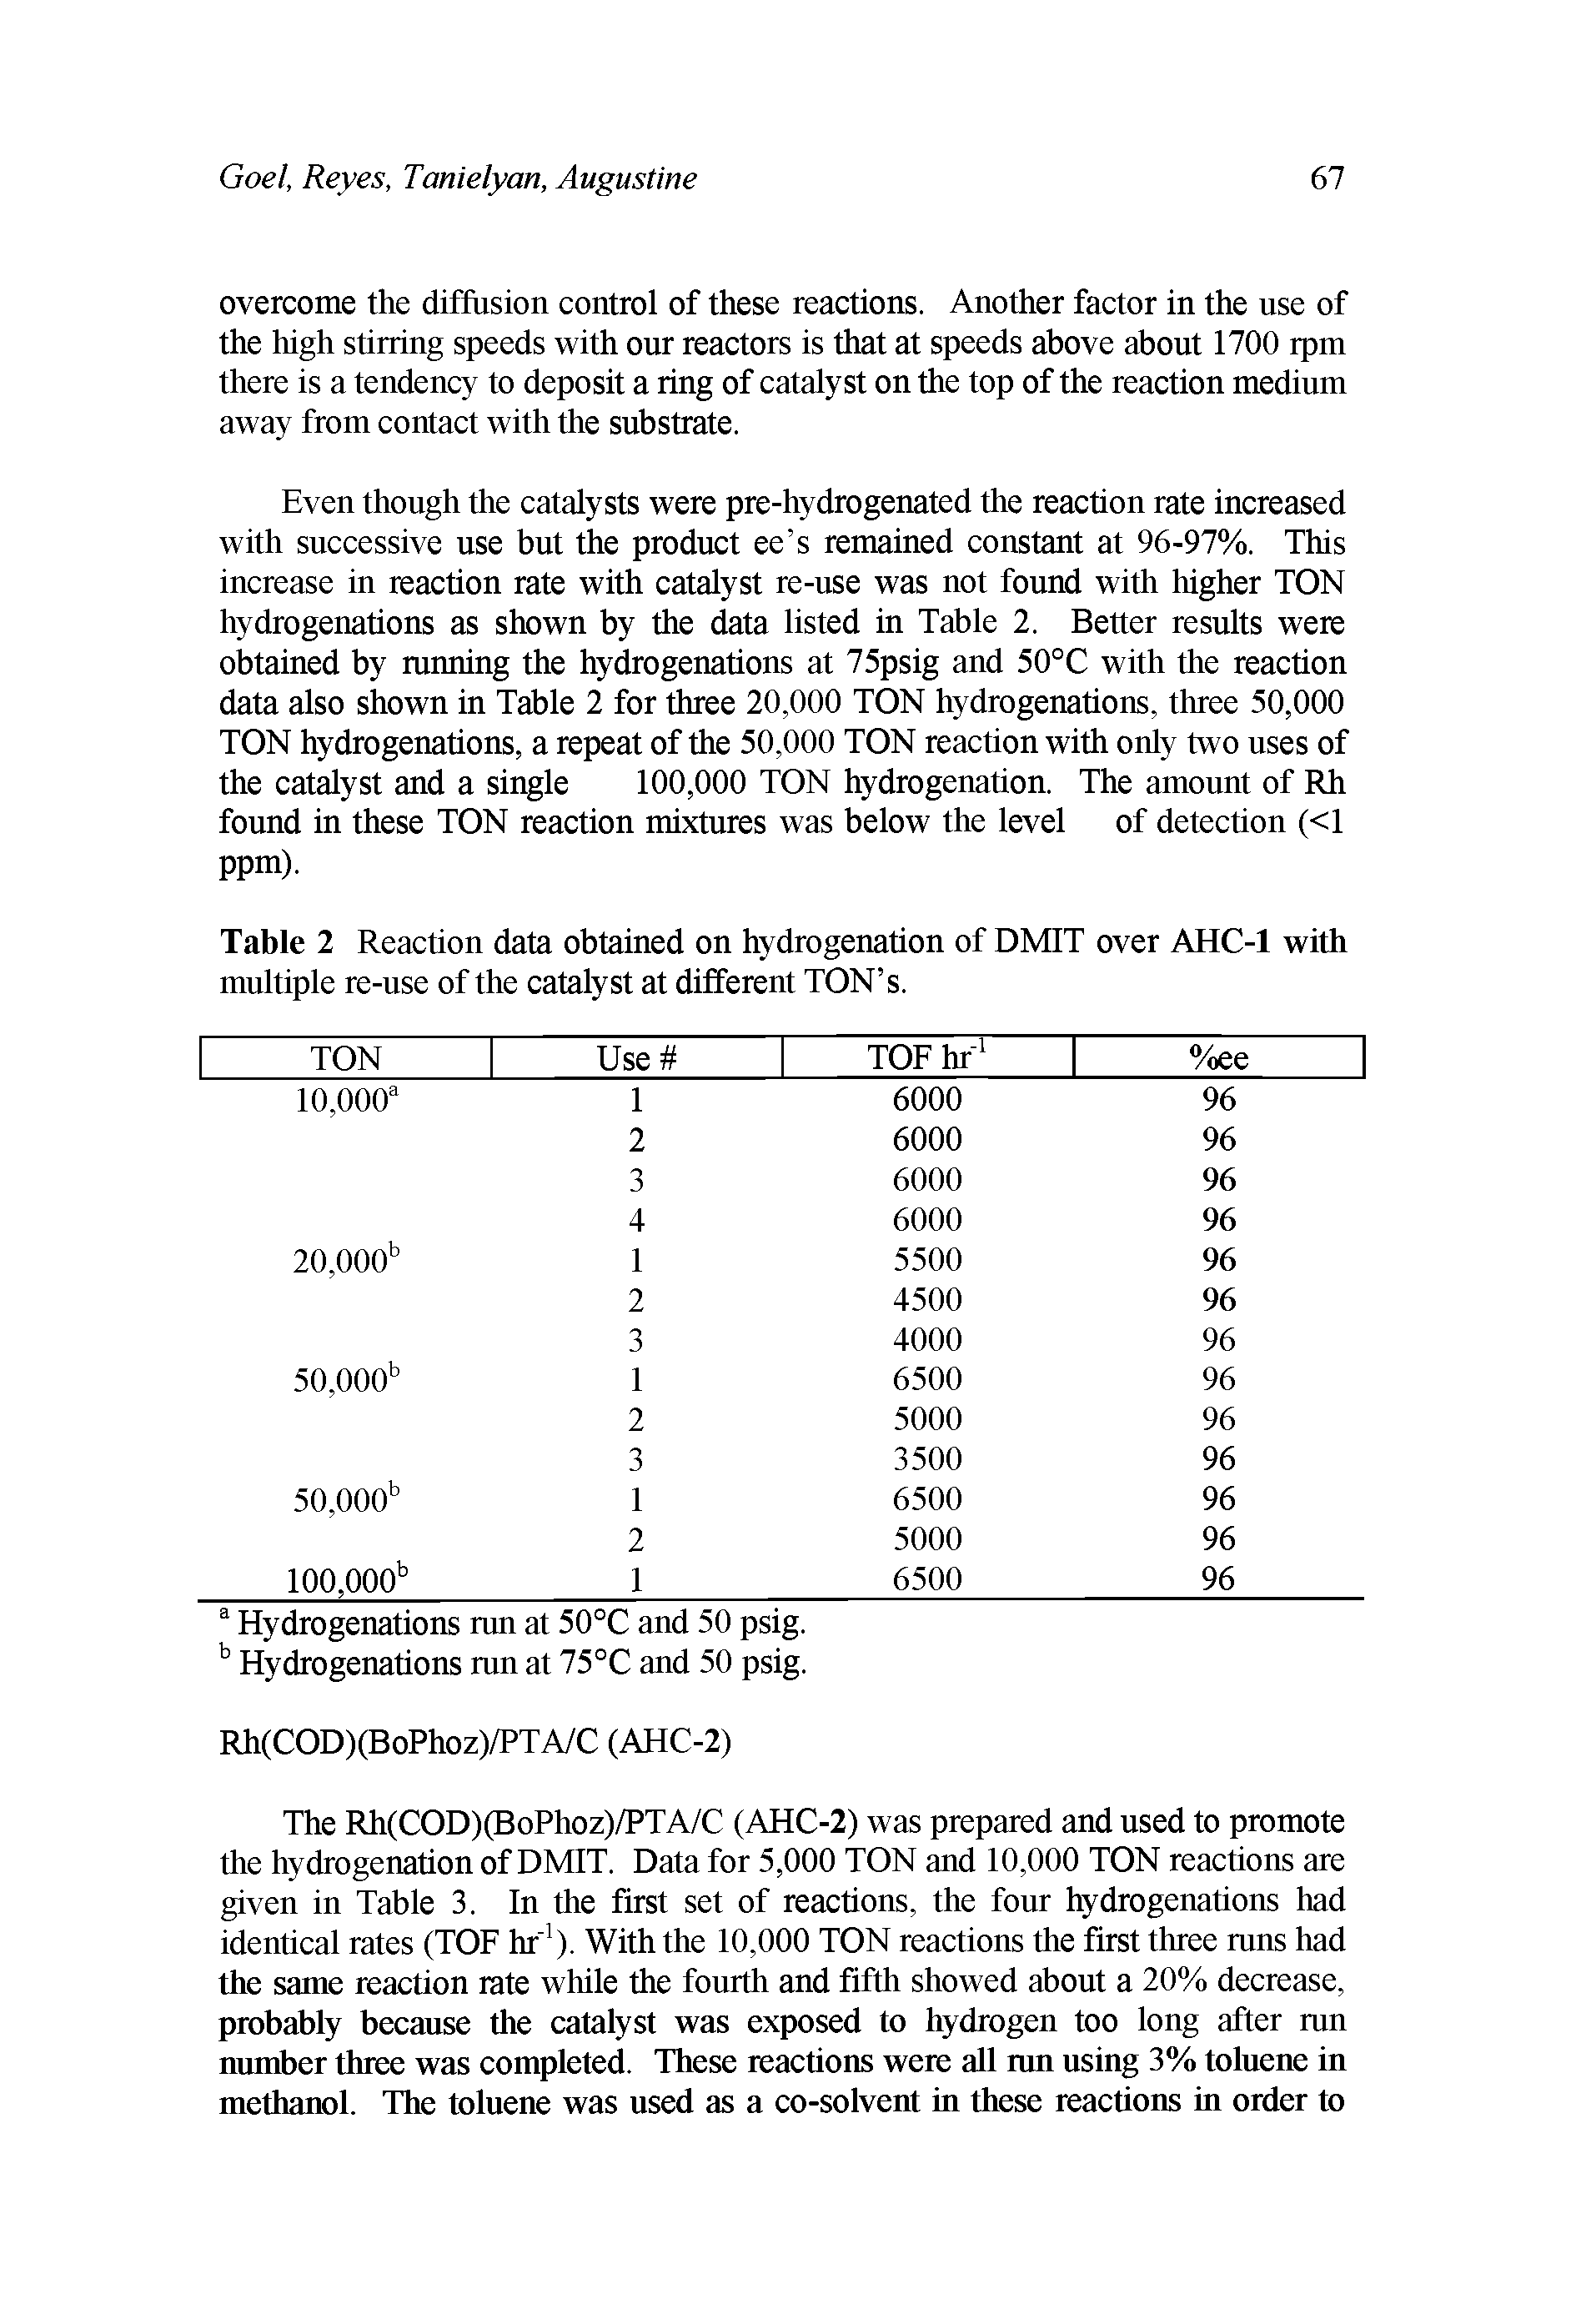 Table 2 Reaction data obtained on hydrogenation of DMIT over AHC-1 with multiple re-use of the catalyst at different TON s.